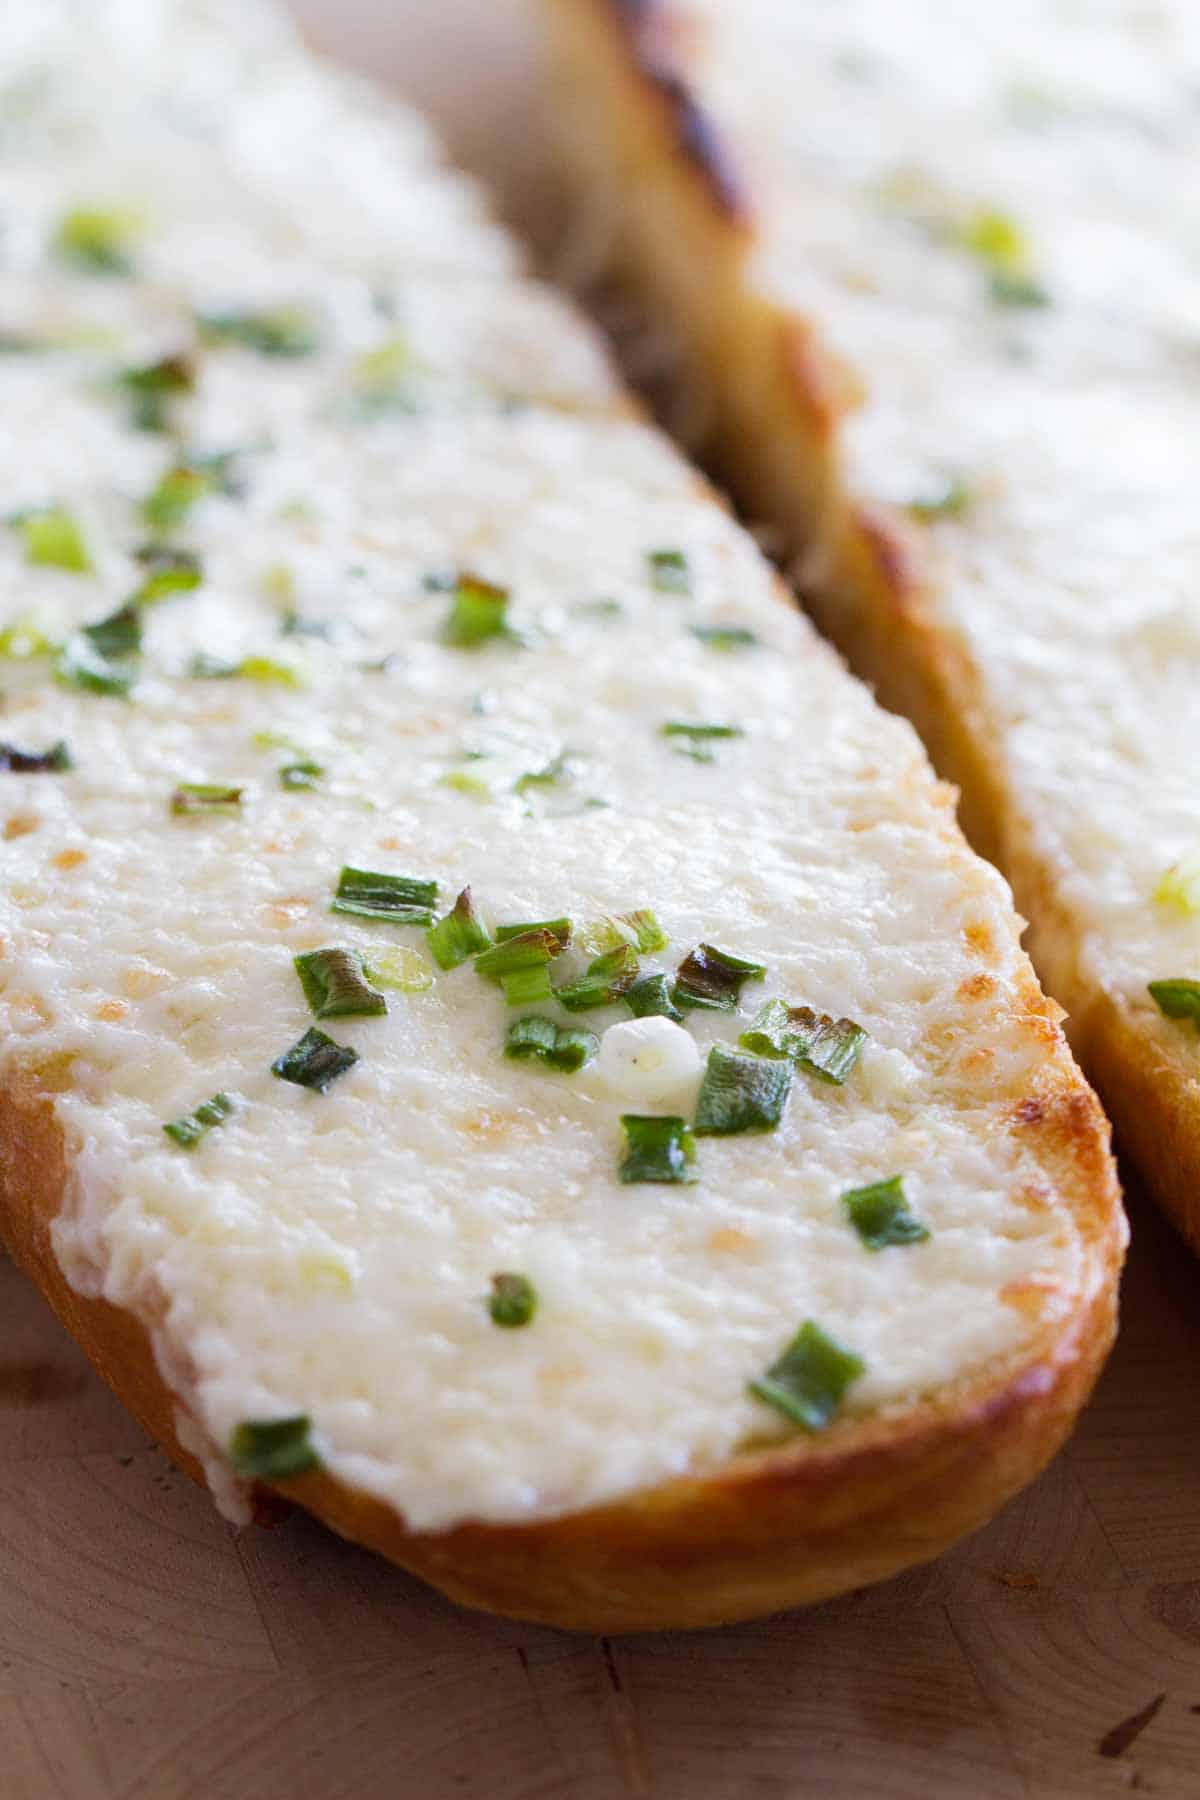 Garlic Bread with lots of cheese